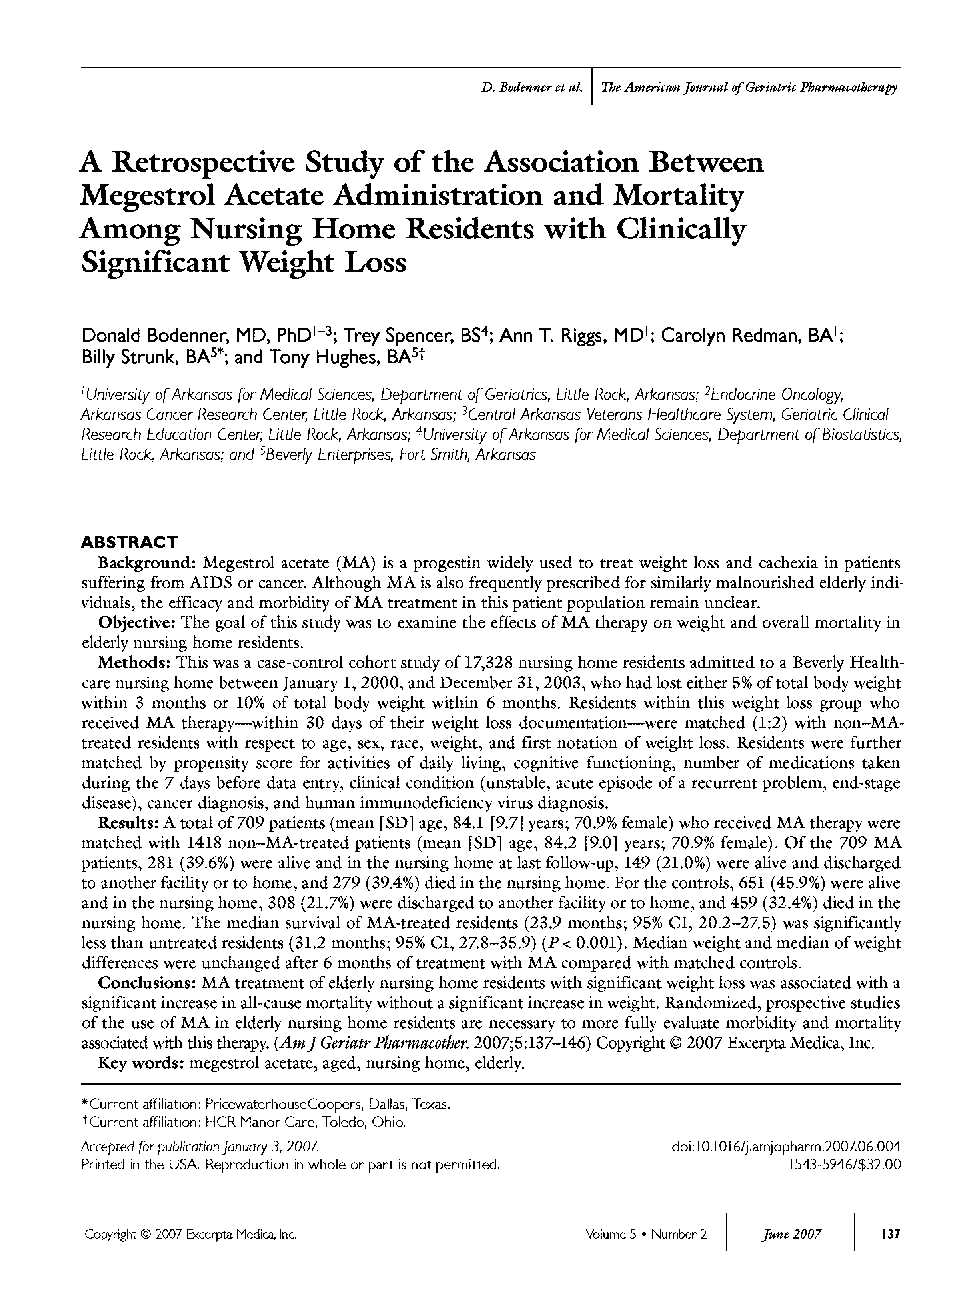 A retrospective study of the association between megestrol acetate administration and mortality among nursing home residents with clinically significant weight loss